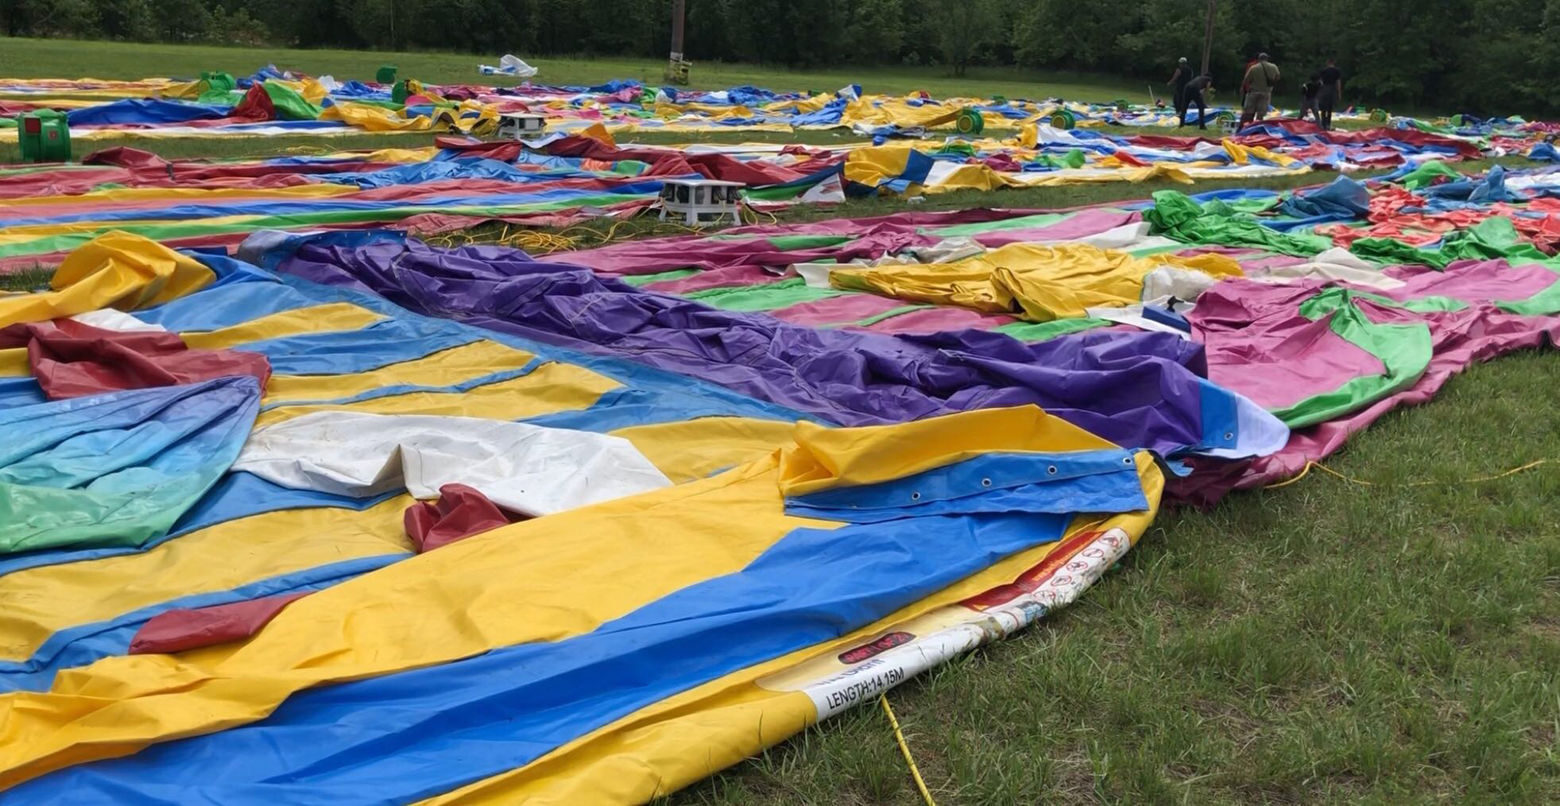 It started out flattened, and taking up a lot of space on a field near Rosecroft Raceway. But then the compressors kicked in. (WTOP/Kristi King)